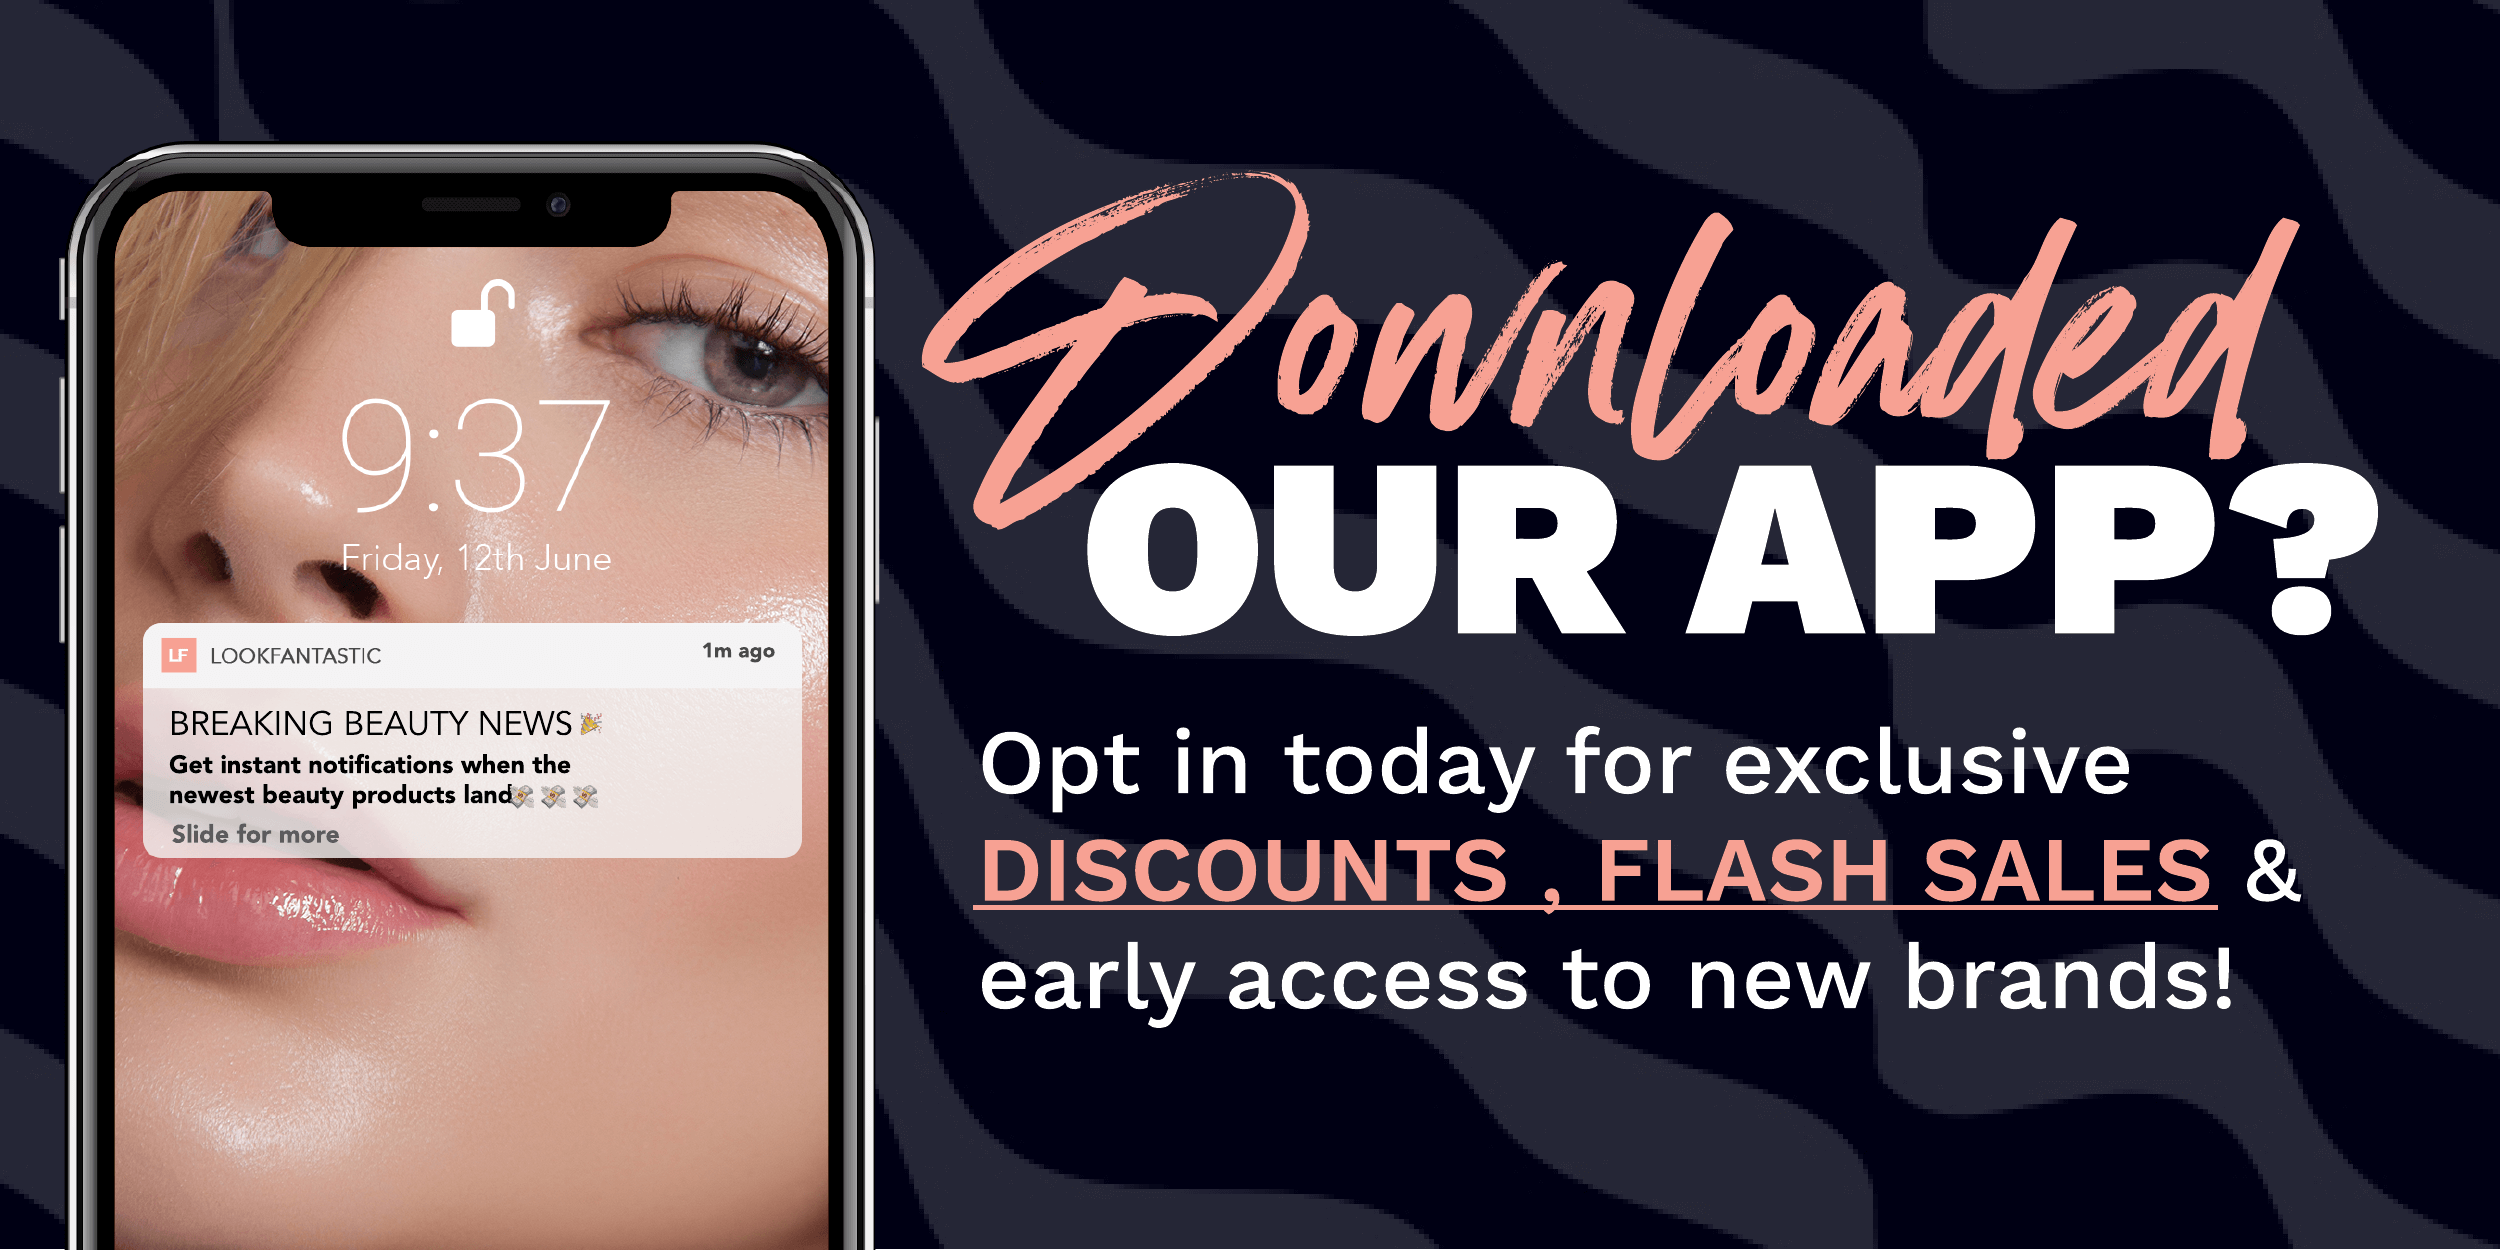  LOOKFANTASTIC BREAKING BEAUTY NEWS # Get instant notifications when the newest beauty products land# Opt in today for exclusive DISCOUNTS . FLASH SALES early access to new brands! 